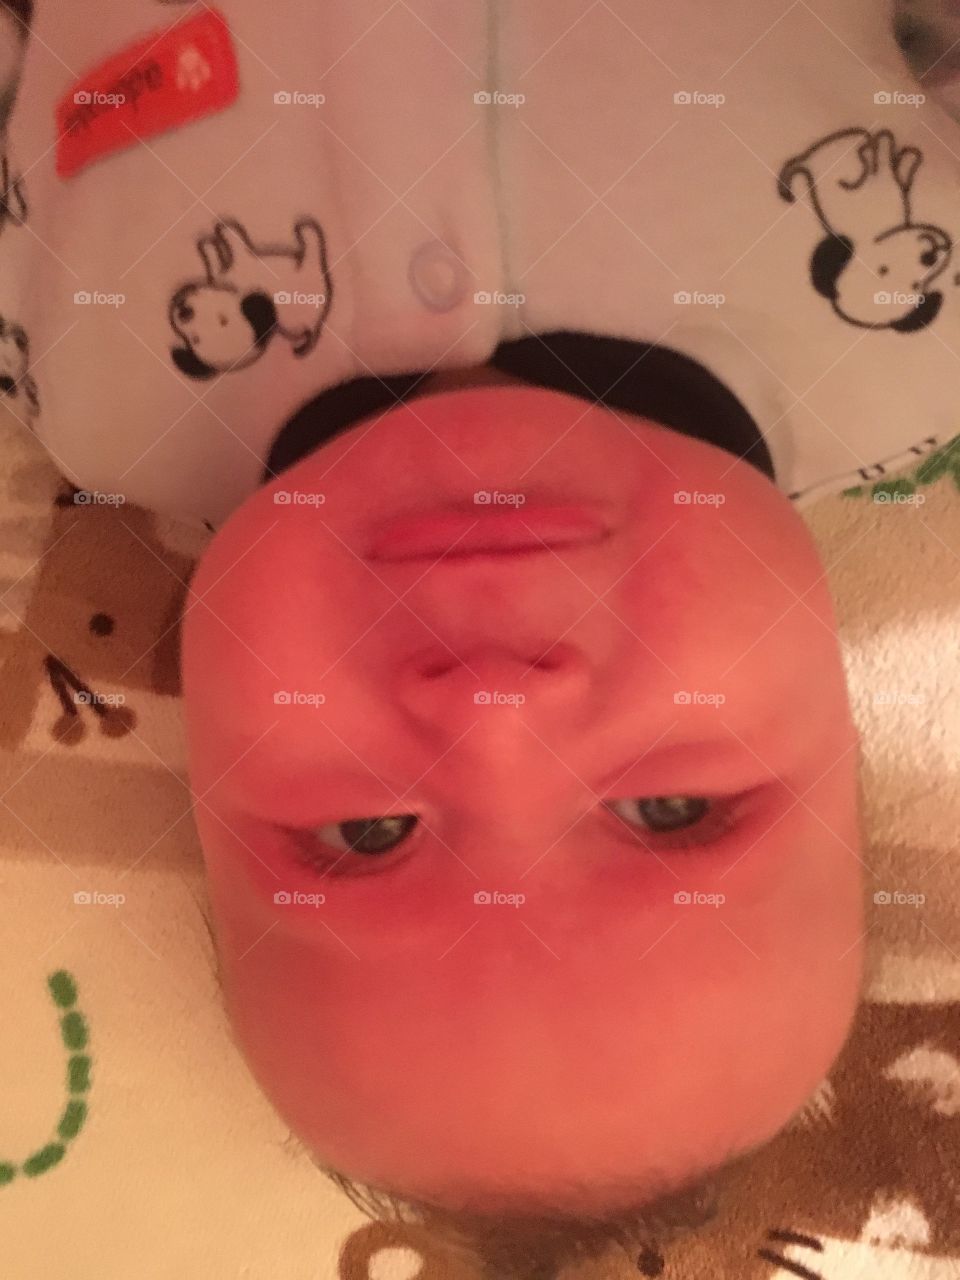 Upside down frown 